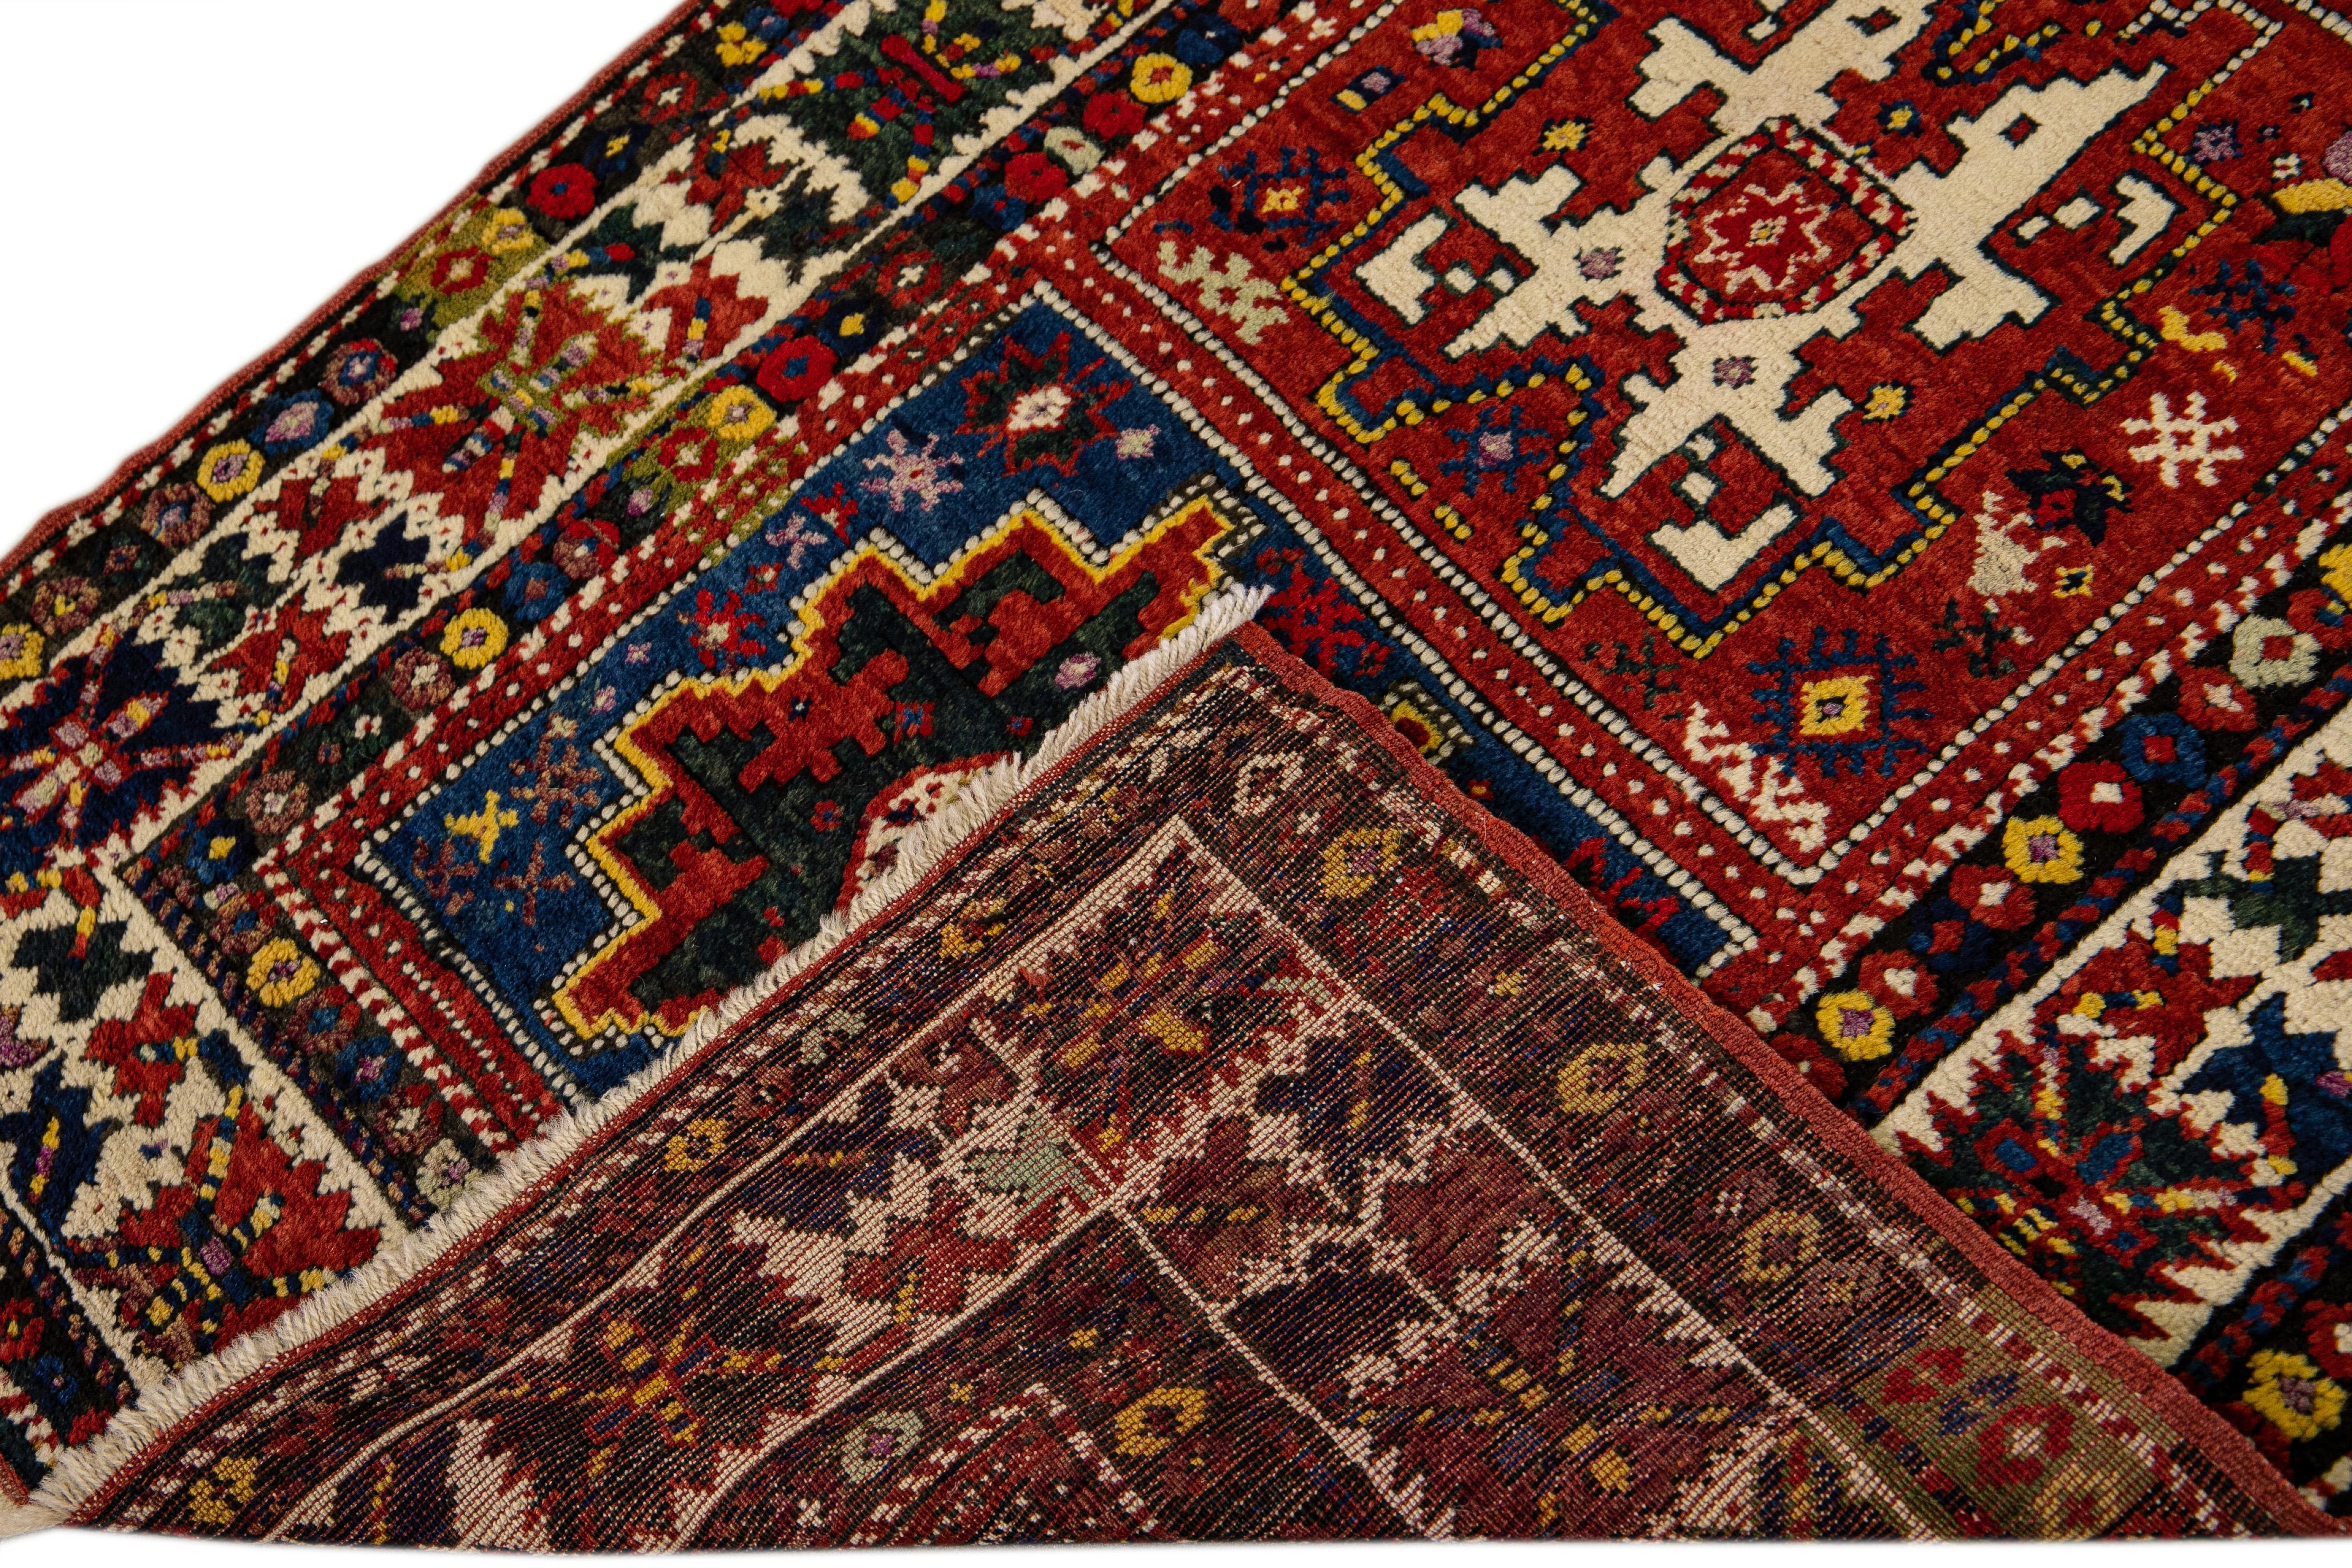 Beautiful antique Serab hand-knotted wool runner with a red field. This Persian rug has a beige frame and multicolor accents in a gorgeous all-over geometric tribal design.

This rug measures: 3'7